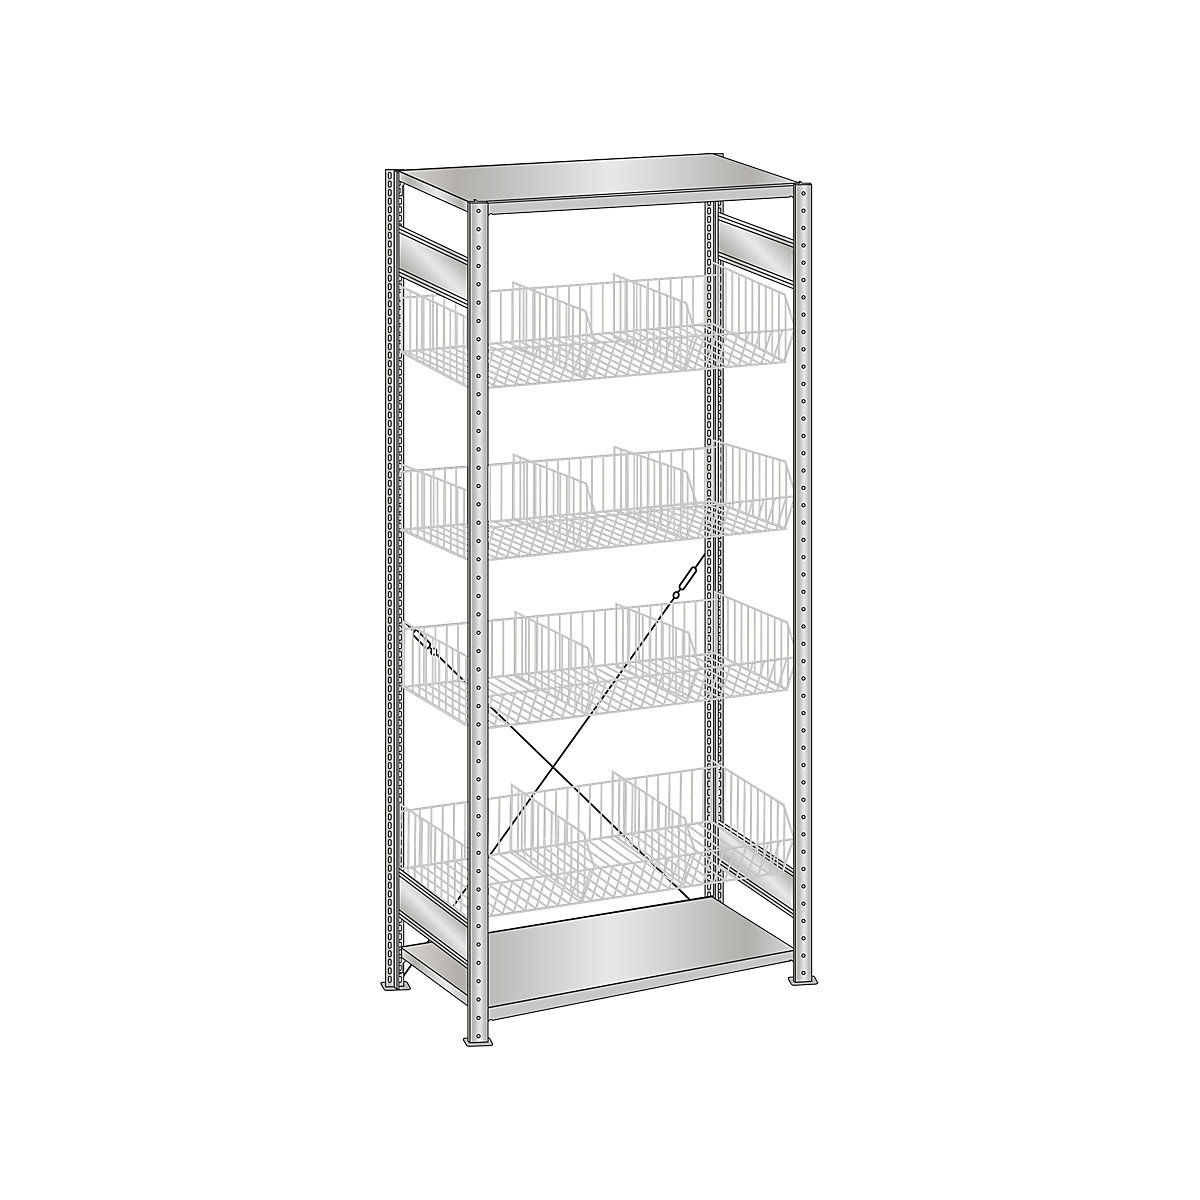 Wire mesh basket shelving unit, zinc plated – SCHULTE, WxD 1000 x 500 mm, with 4 baskets, standard shelf unit, height 2000 mm